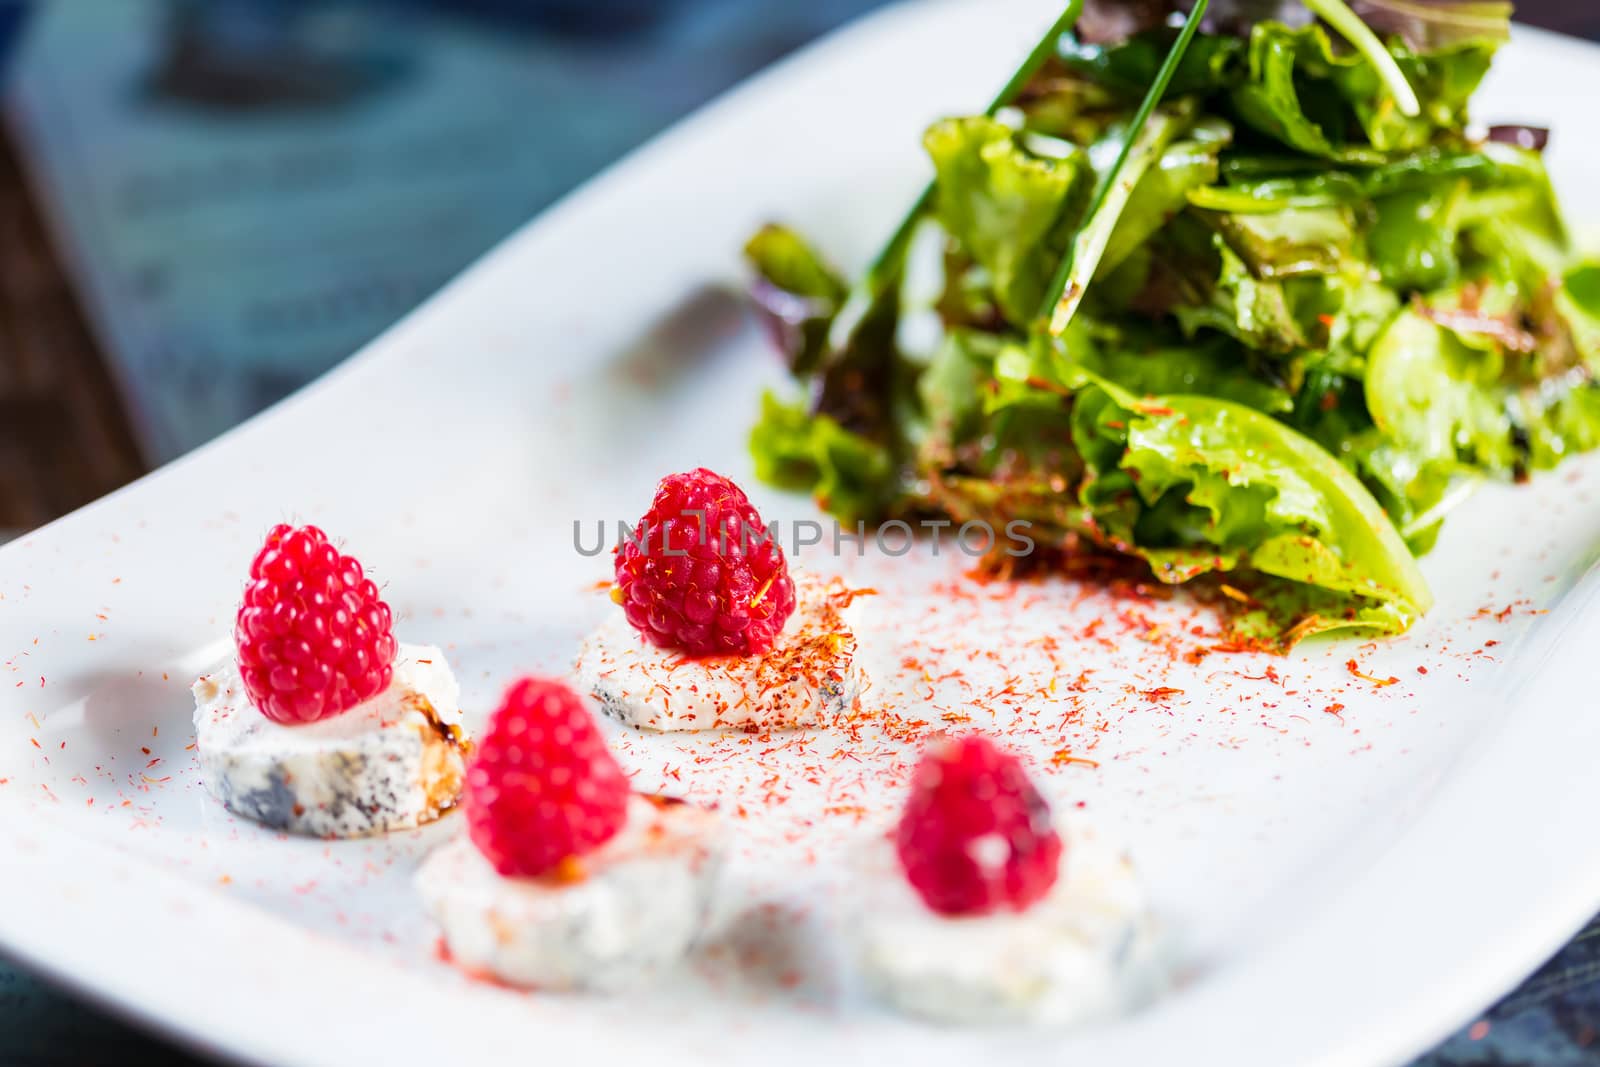 fresh salad with goat cheese and raspberry. Healthy Food